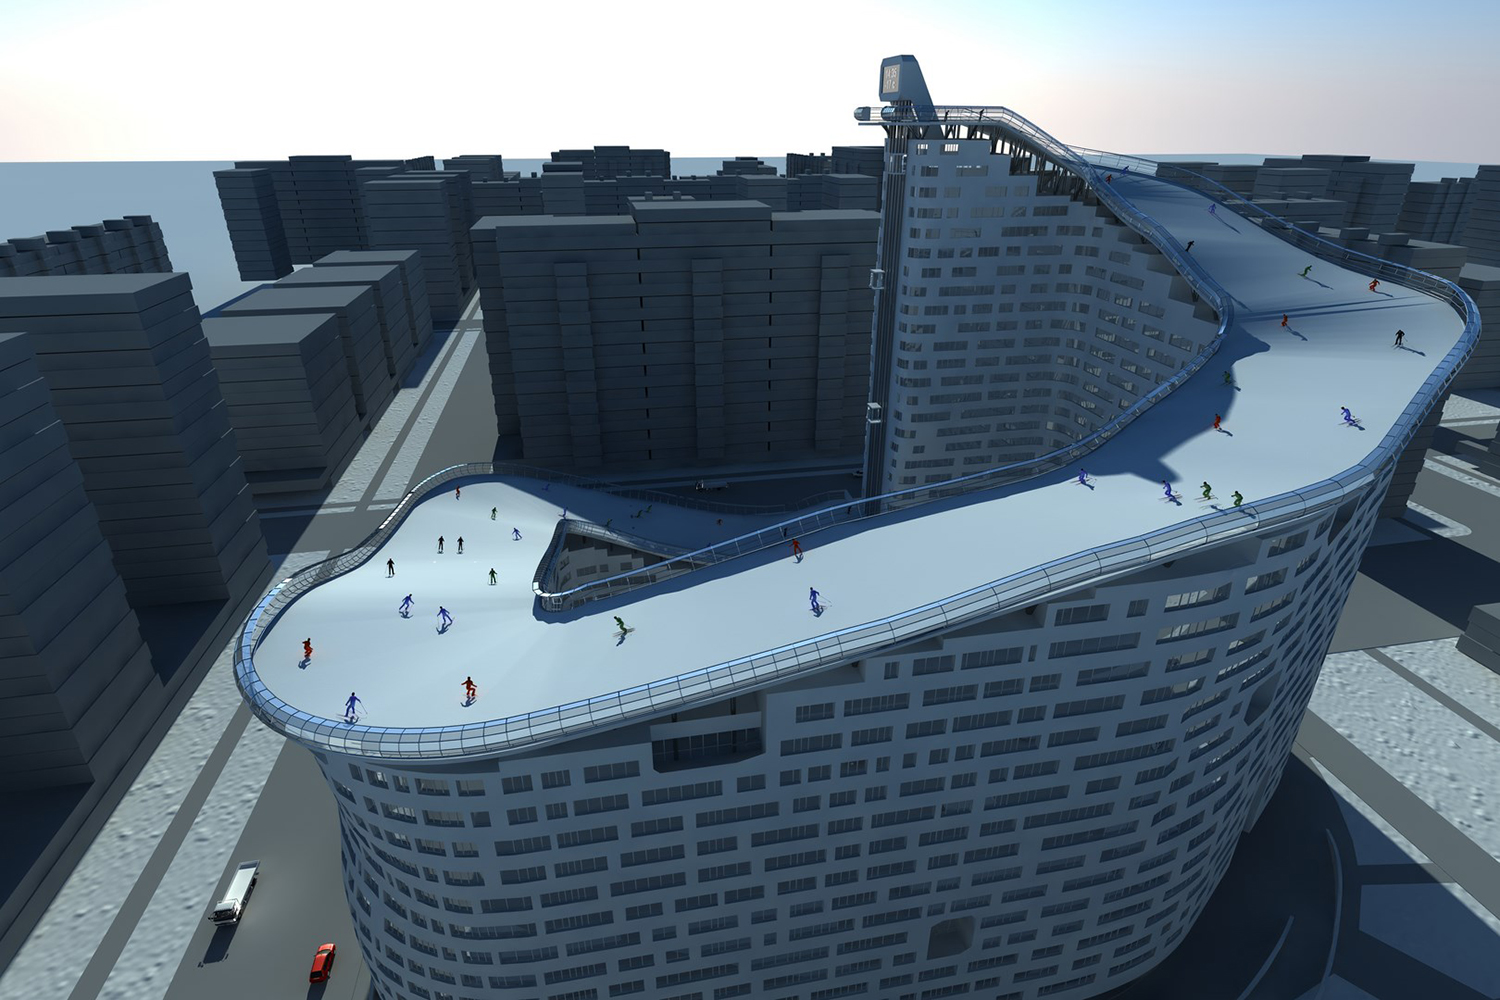 house slalom is an apartment building with a ski slope concept shokhan mataibekov 003